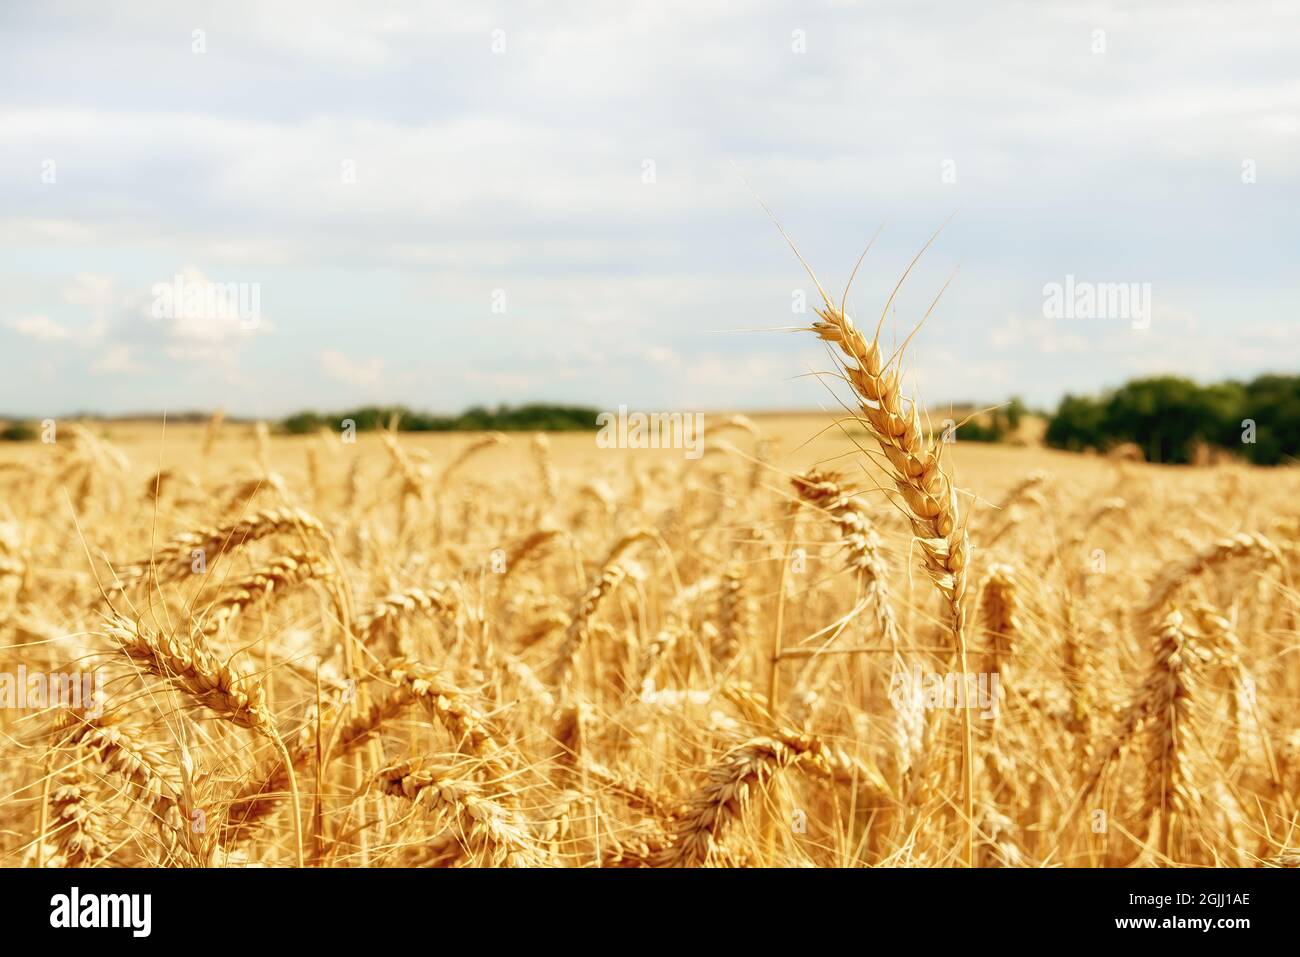 View of golden ears of corn, a field of wheat on a sunny day under a blue sky with clouds Stock Photo